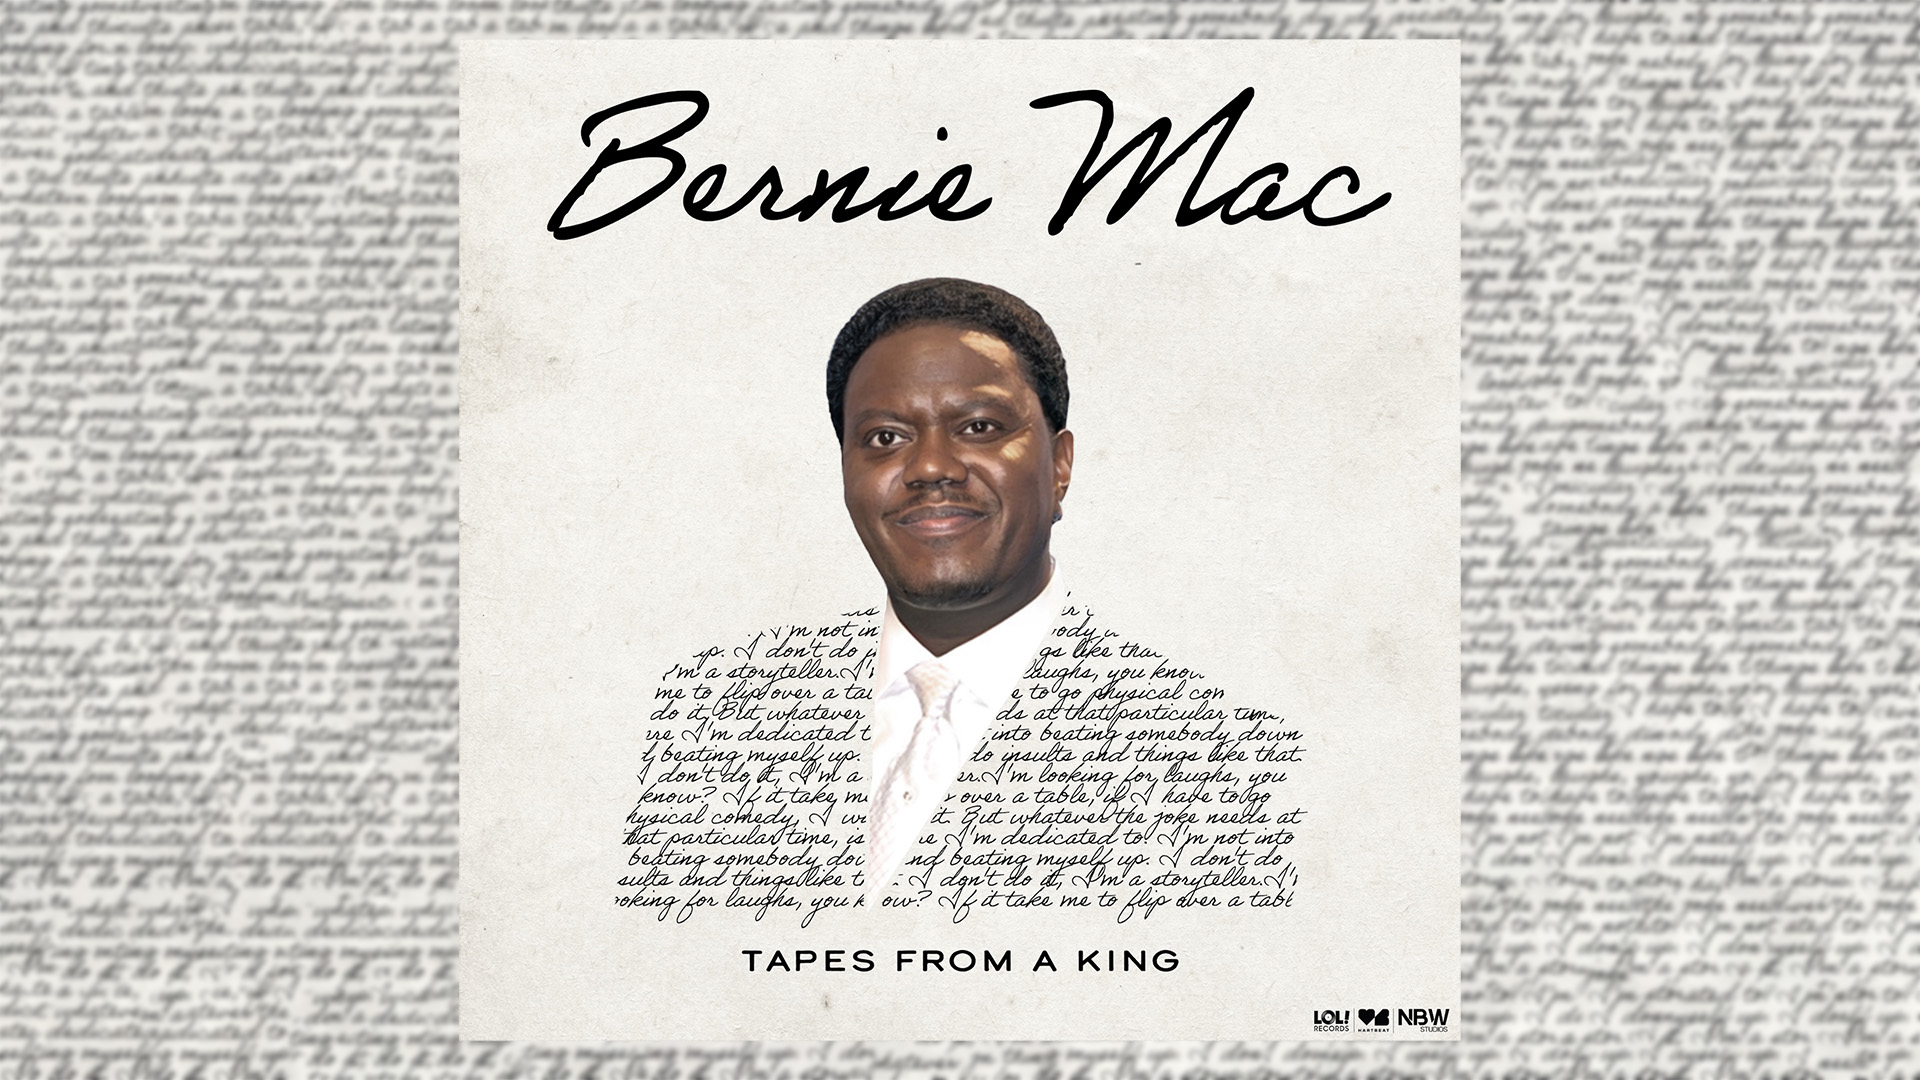 Listen to Bernie Mac Tapes from a King on SiriusXM